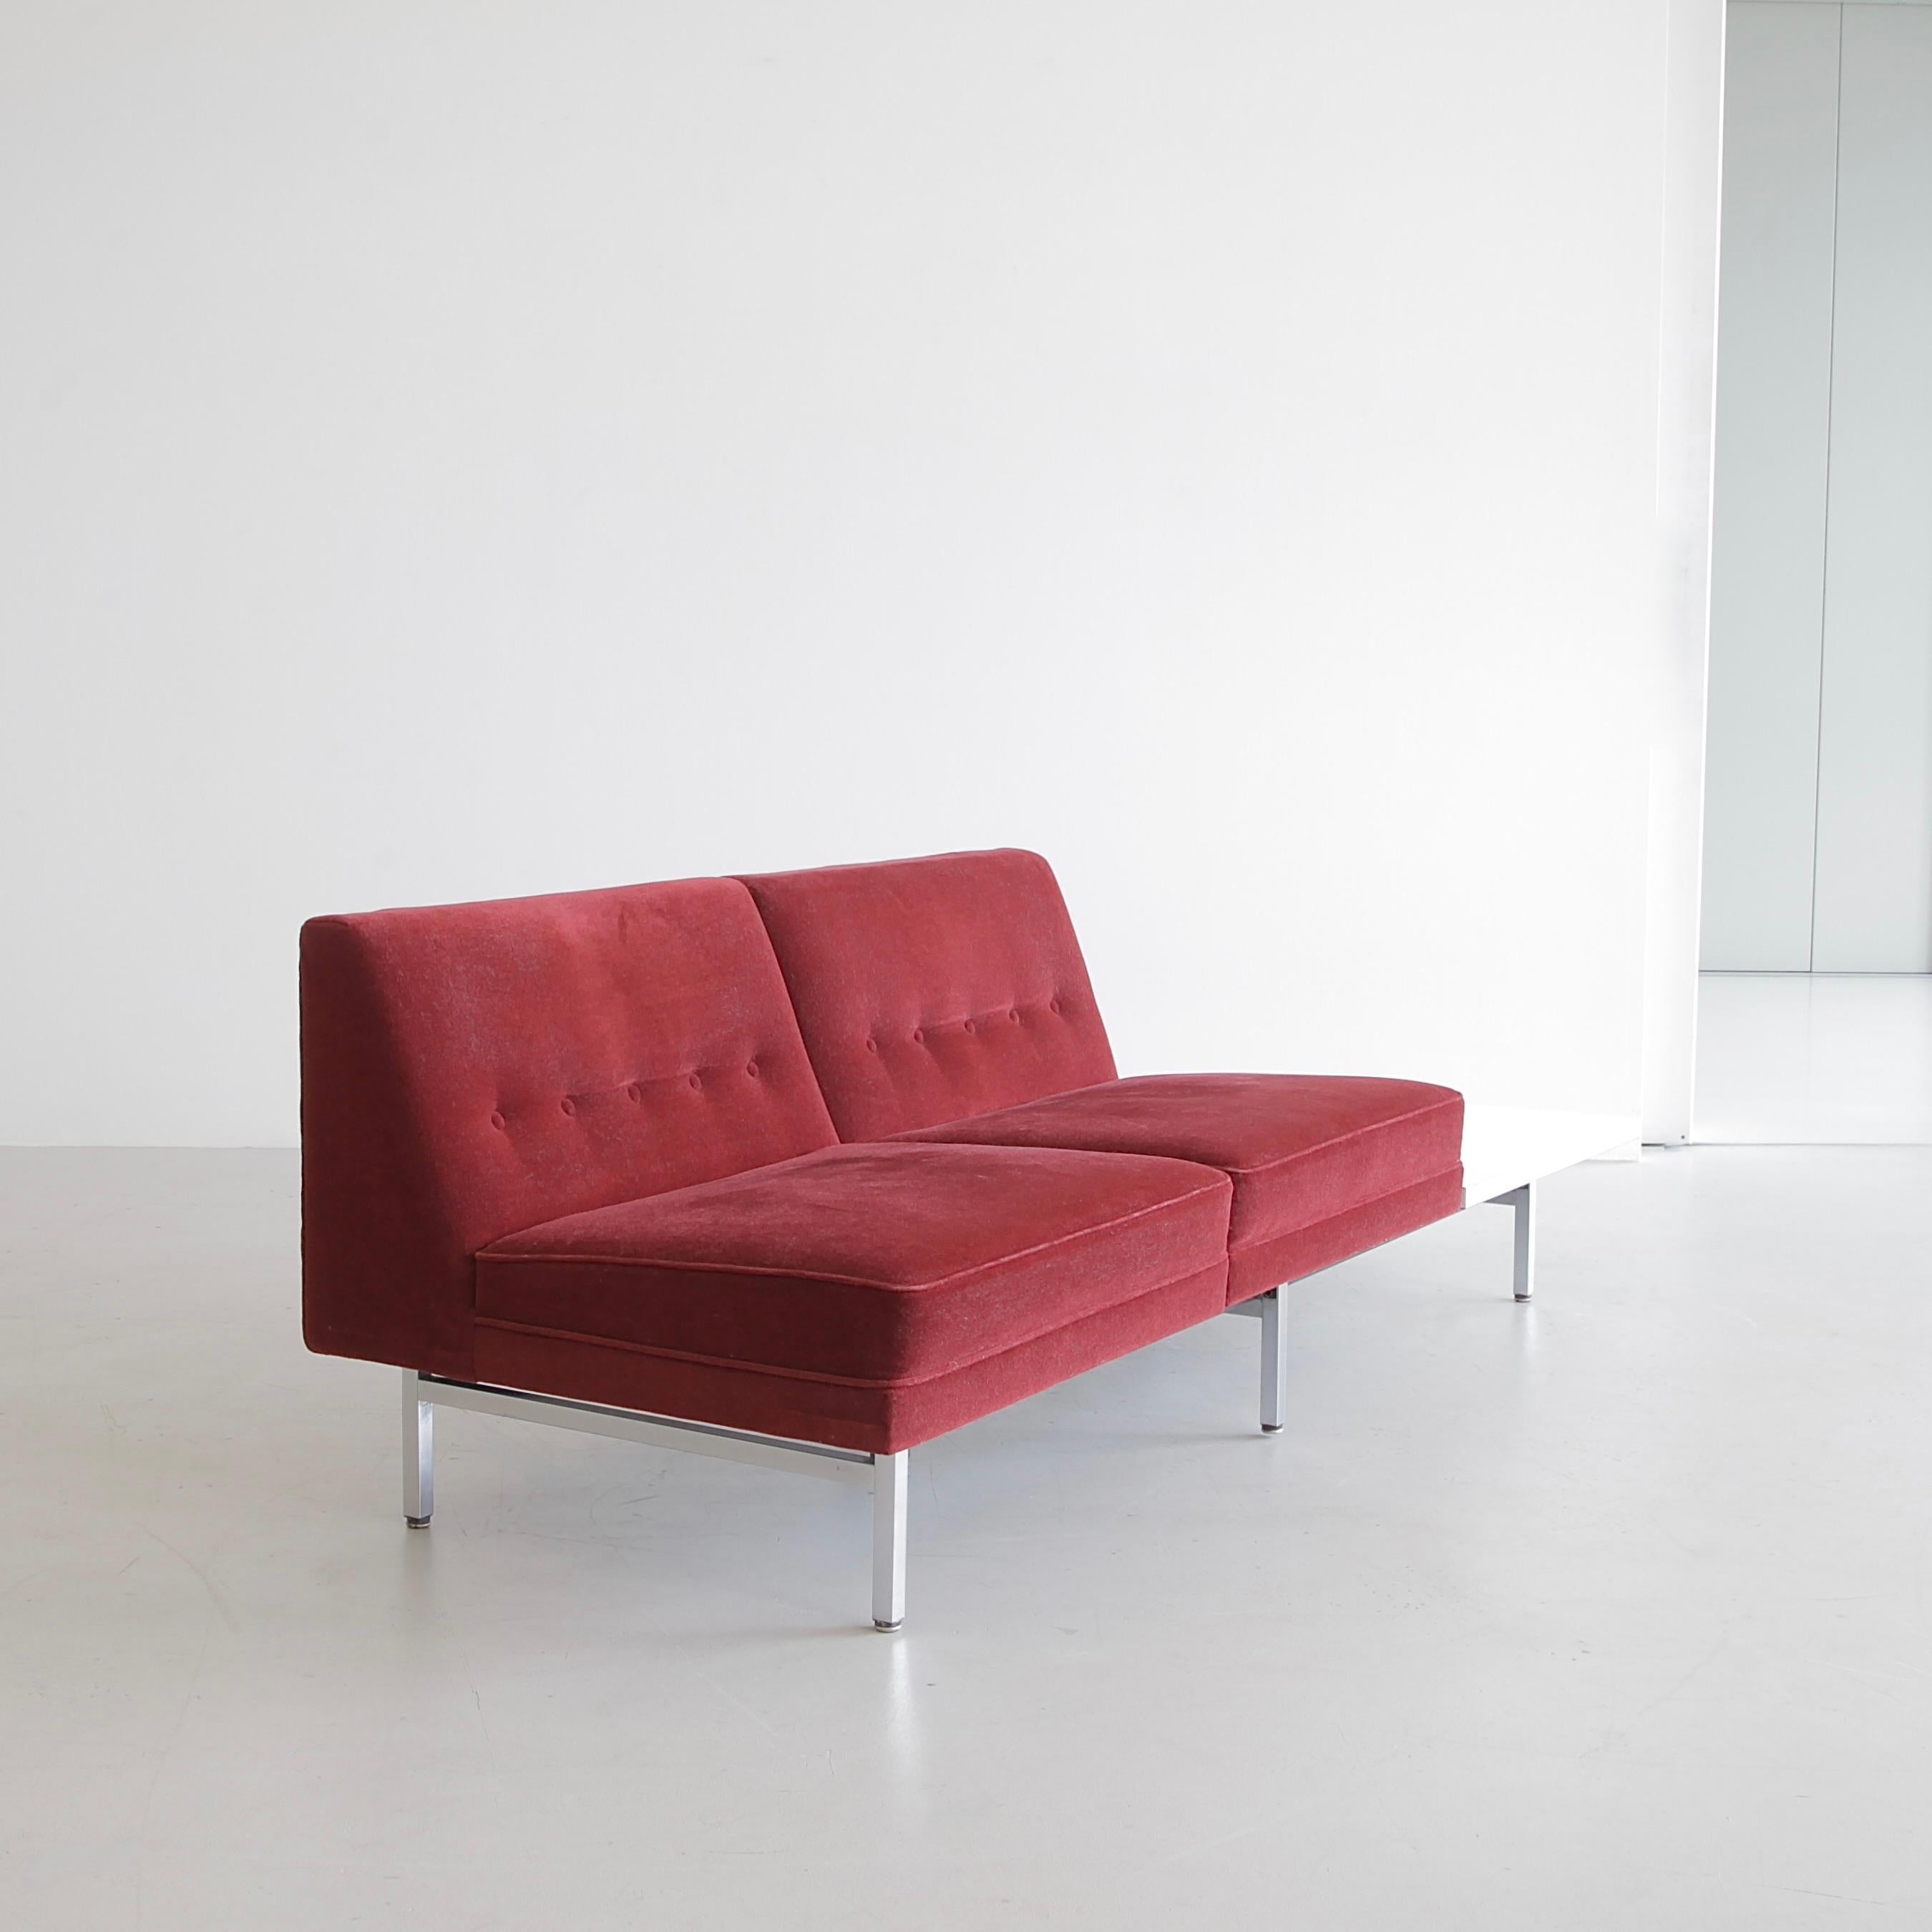 Upholstery Modular Sofa designed by George NELSON for HERMAN MILLER, 1960s For Sale